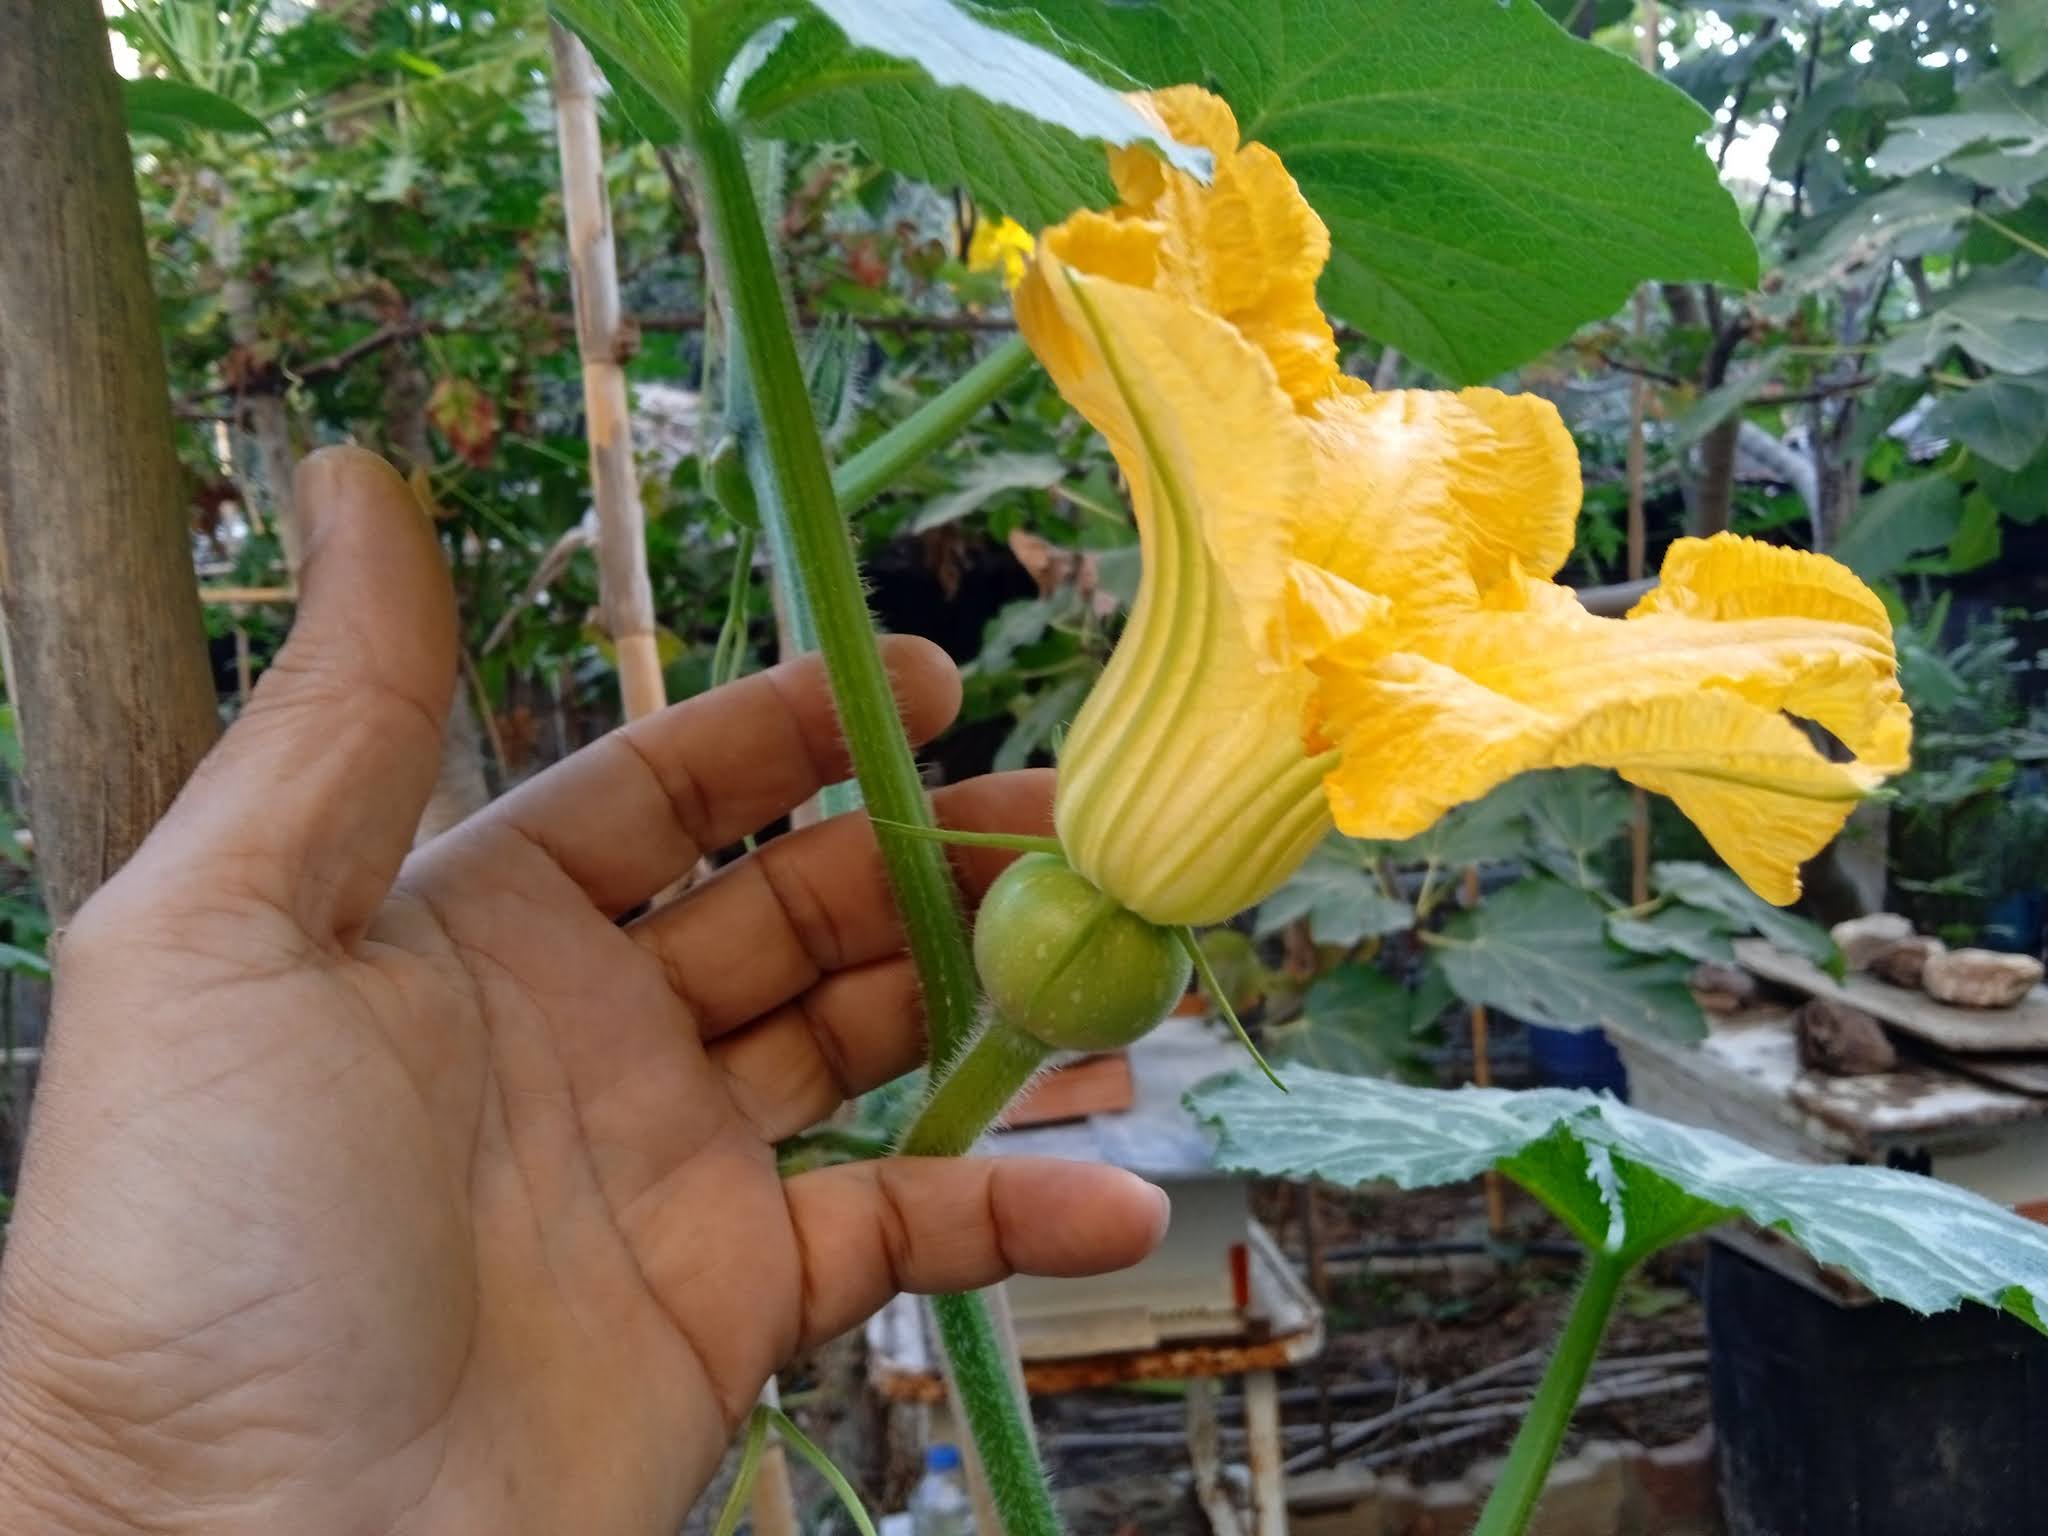 Female squash flower is most easily identified by the little immature squash fruit that is attached at the base of the flower.